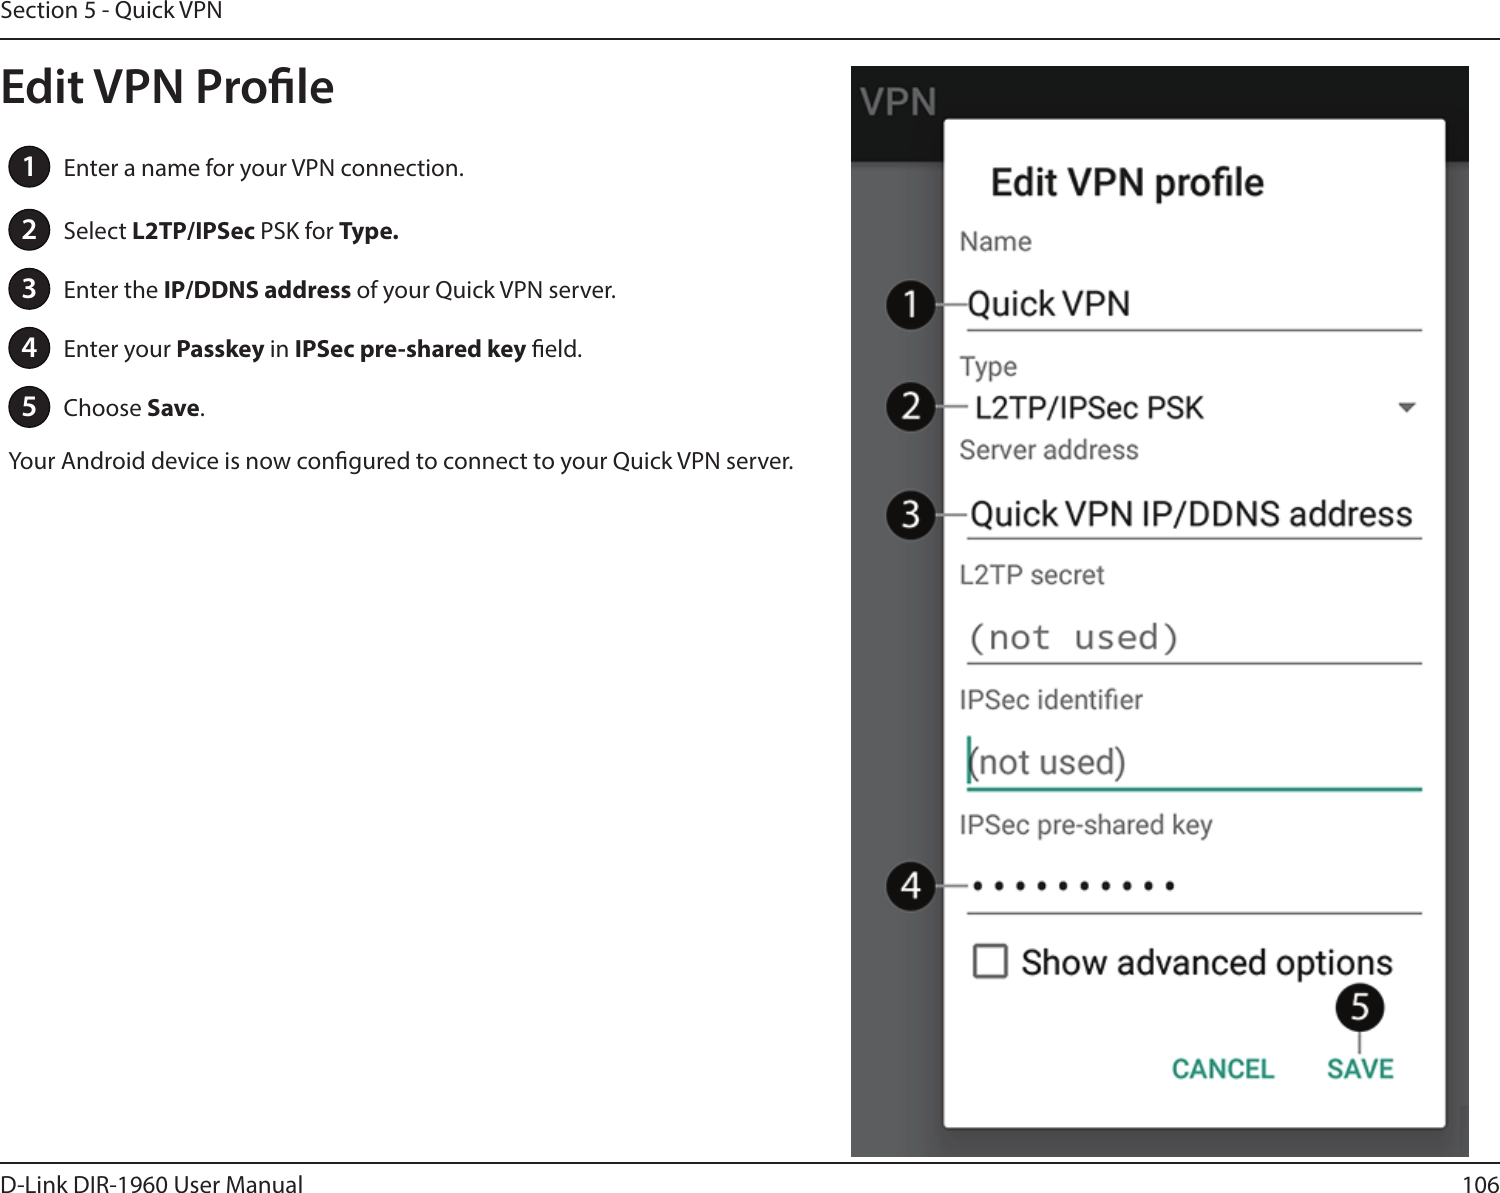 106D-Link DIR-1960 User ManualSection 5 - Quick VPN1Enter a name for your VPN connection.2Select L2TP/IPSec PSK for Type.3Enter the IP/DDNS address of your Quick VPN server.4Enter your Passkey in IPSec pre-shared key eld.5Choose Save.Your Android device is now congured to connect to your Quick VPN server.Edit VPN Prole